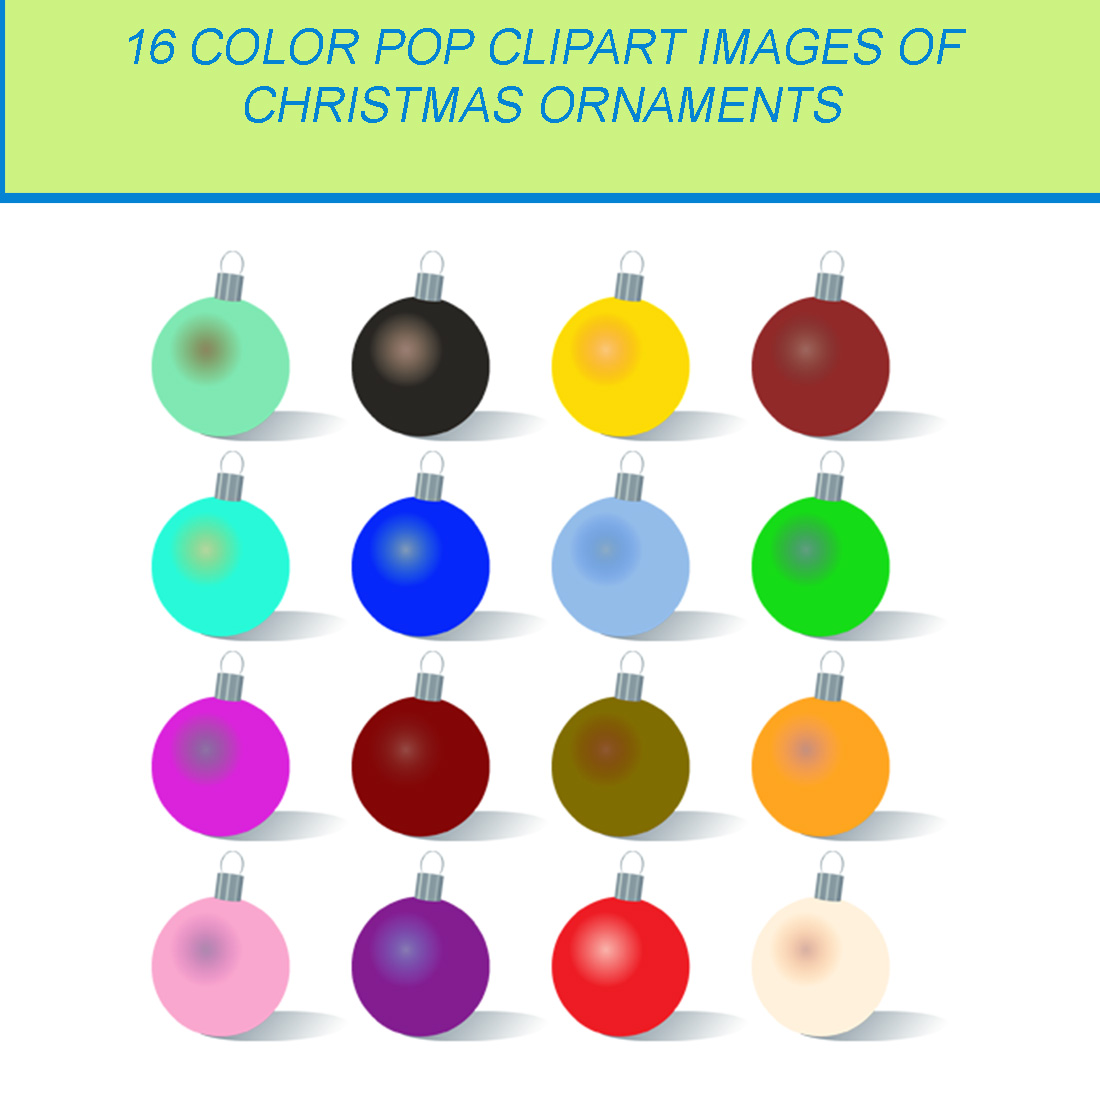 16 COLOR POP CLIPART IMAGES OF CHRISTMAS ORNAMENT cover image.